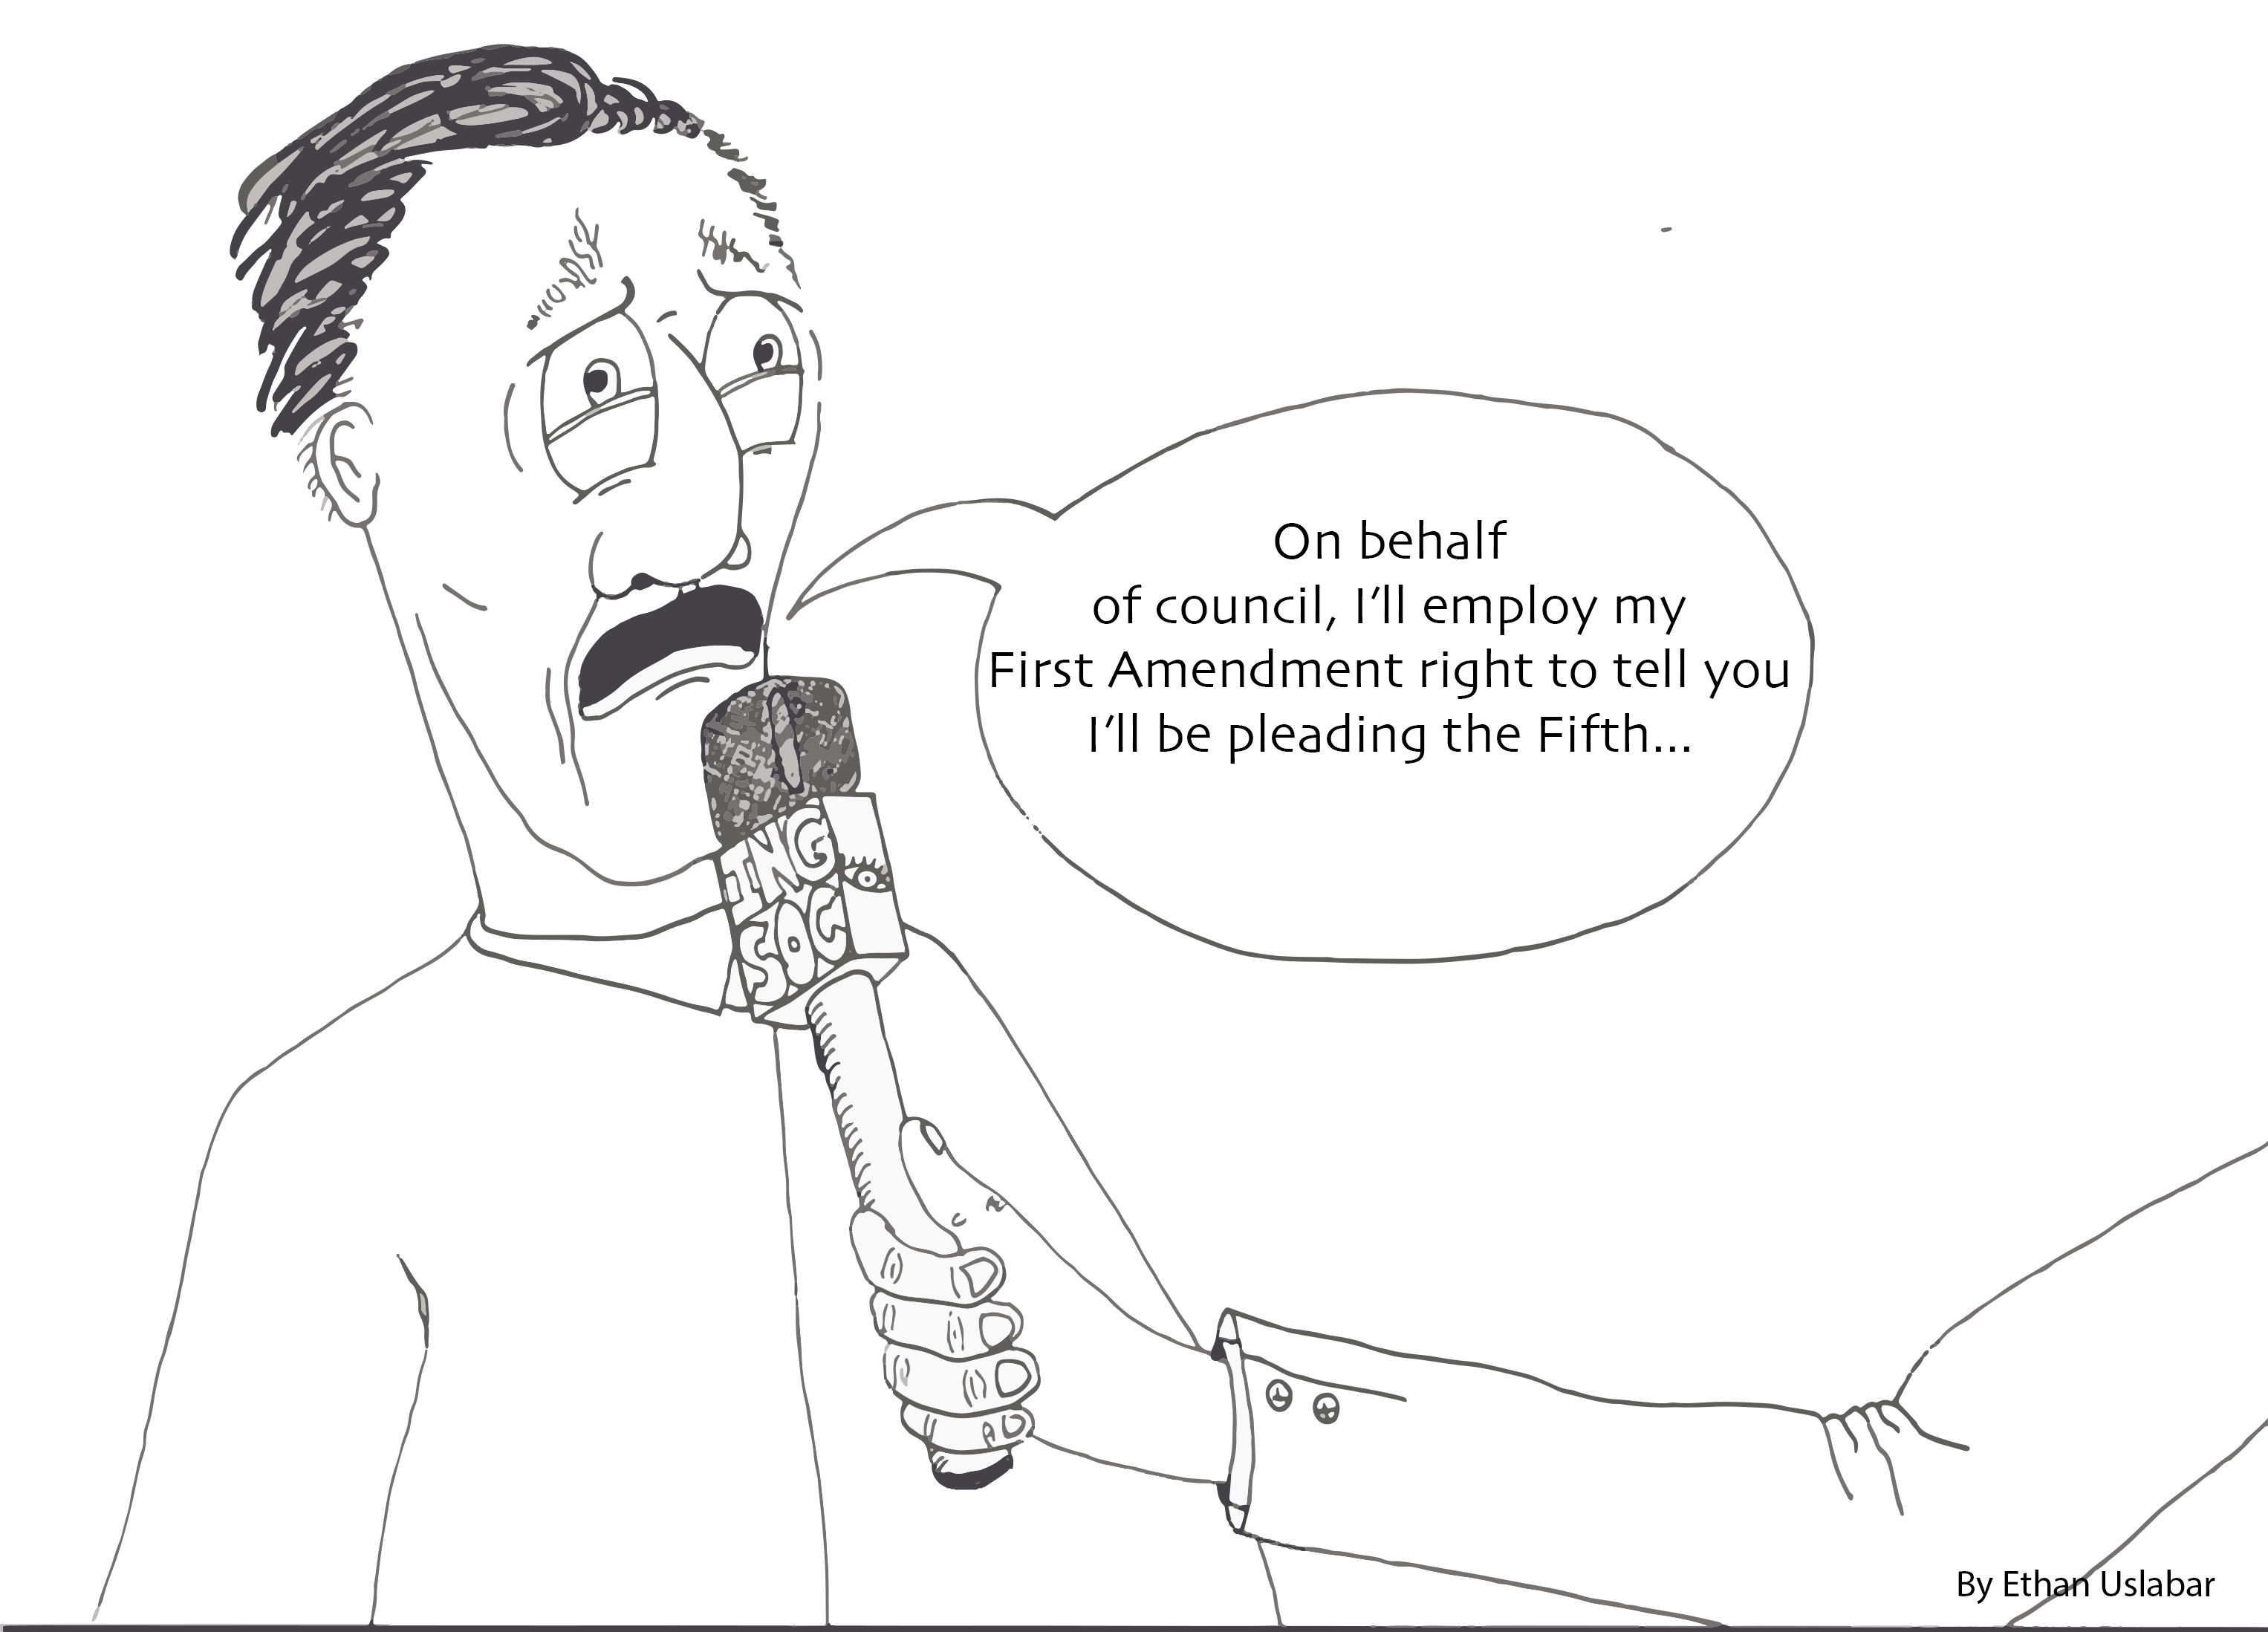 opinion cartoon, man speaking into microphone. "On behalf of council, I'll be using my first amendment right to tell you, I'm pleading the fifth."